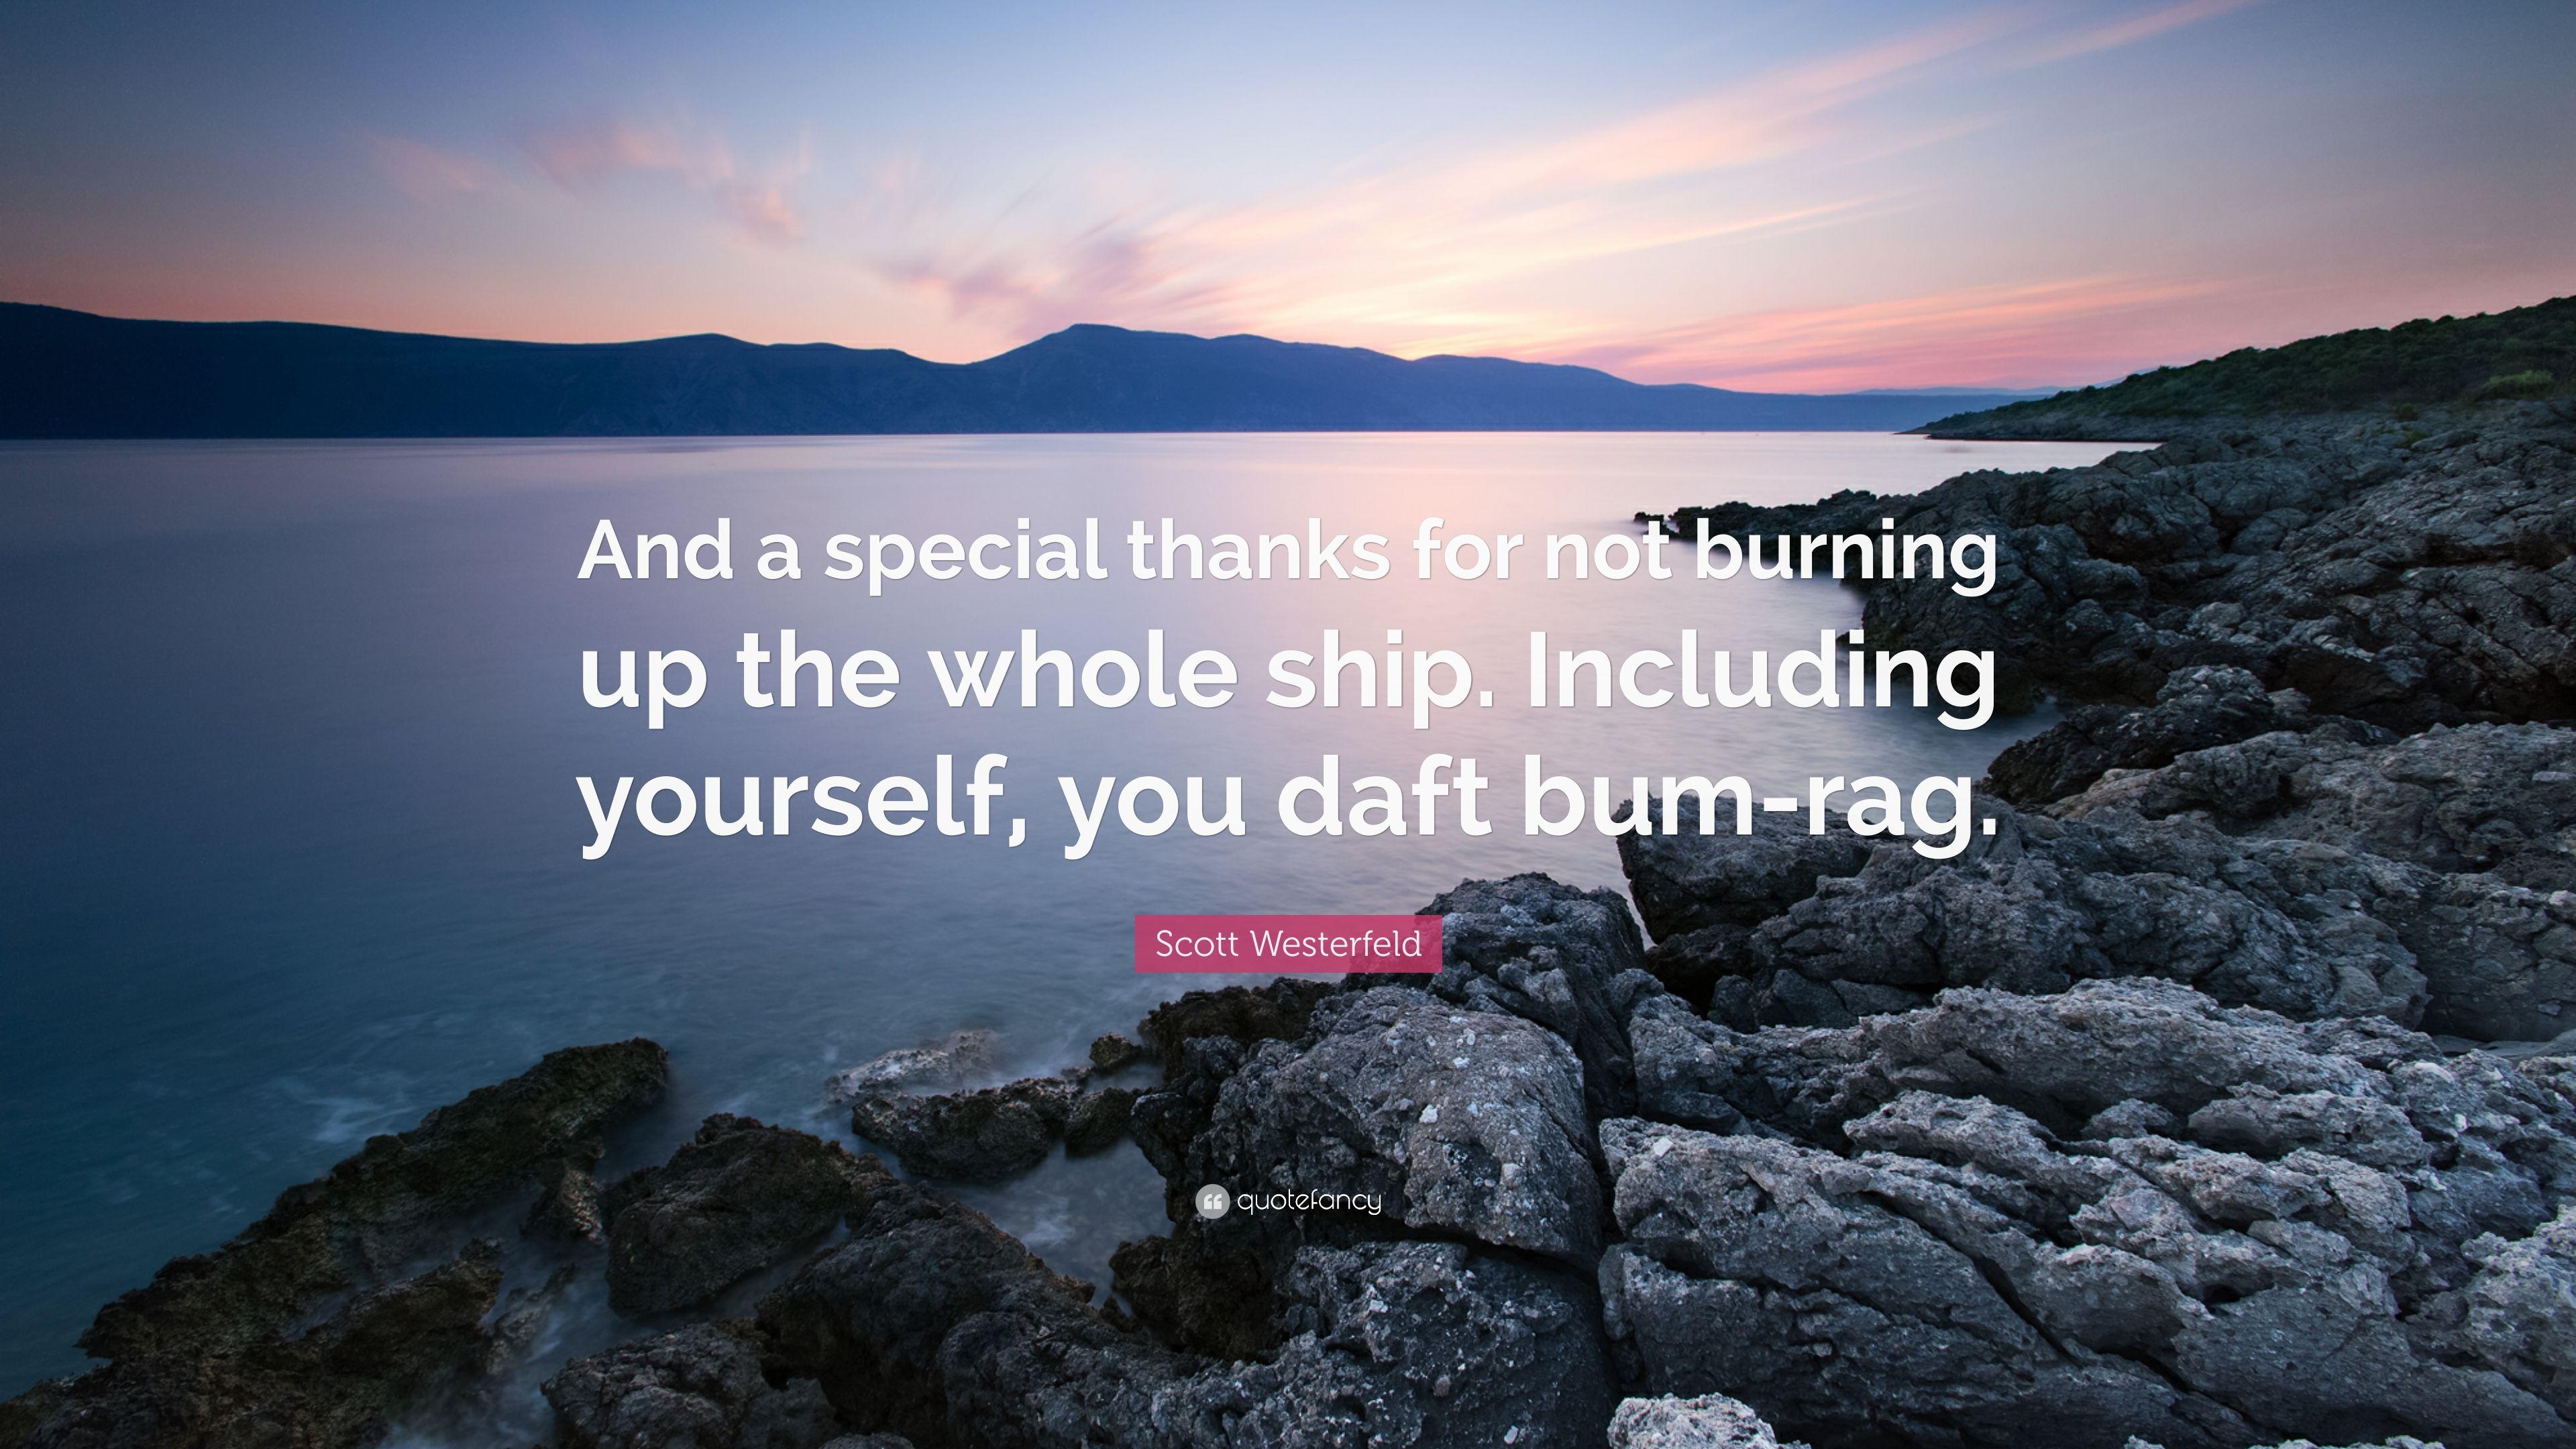 Scott Westerfeld Quote: “And a special thanks for not burning up